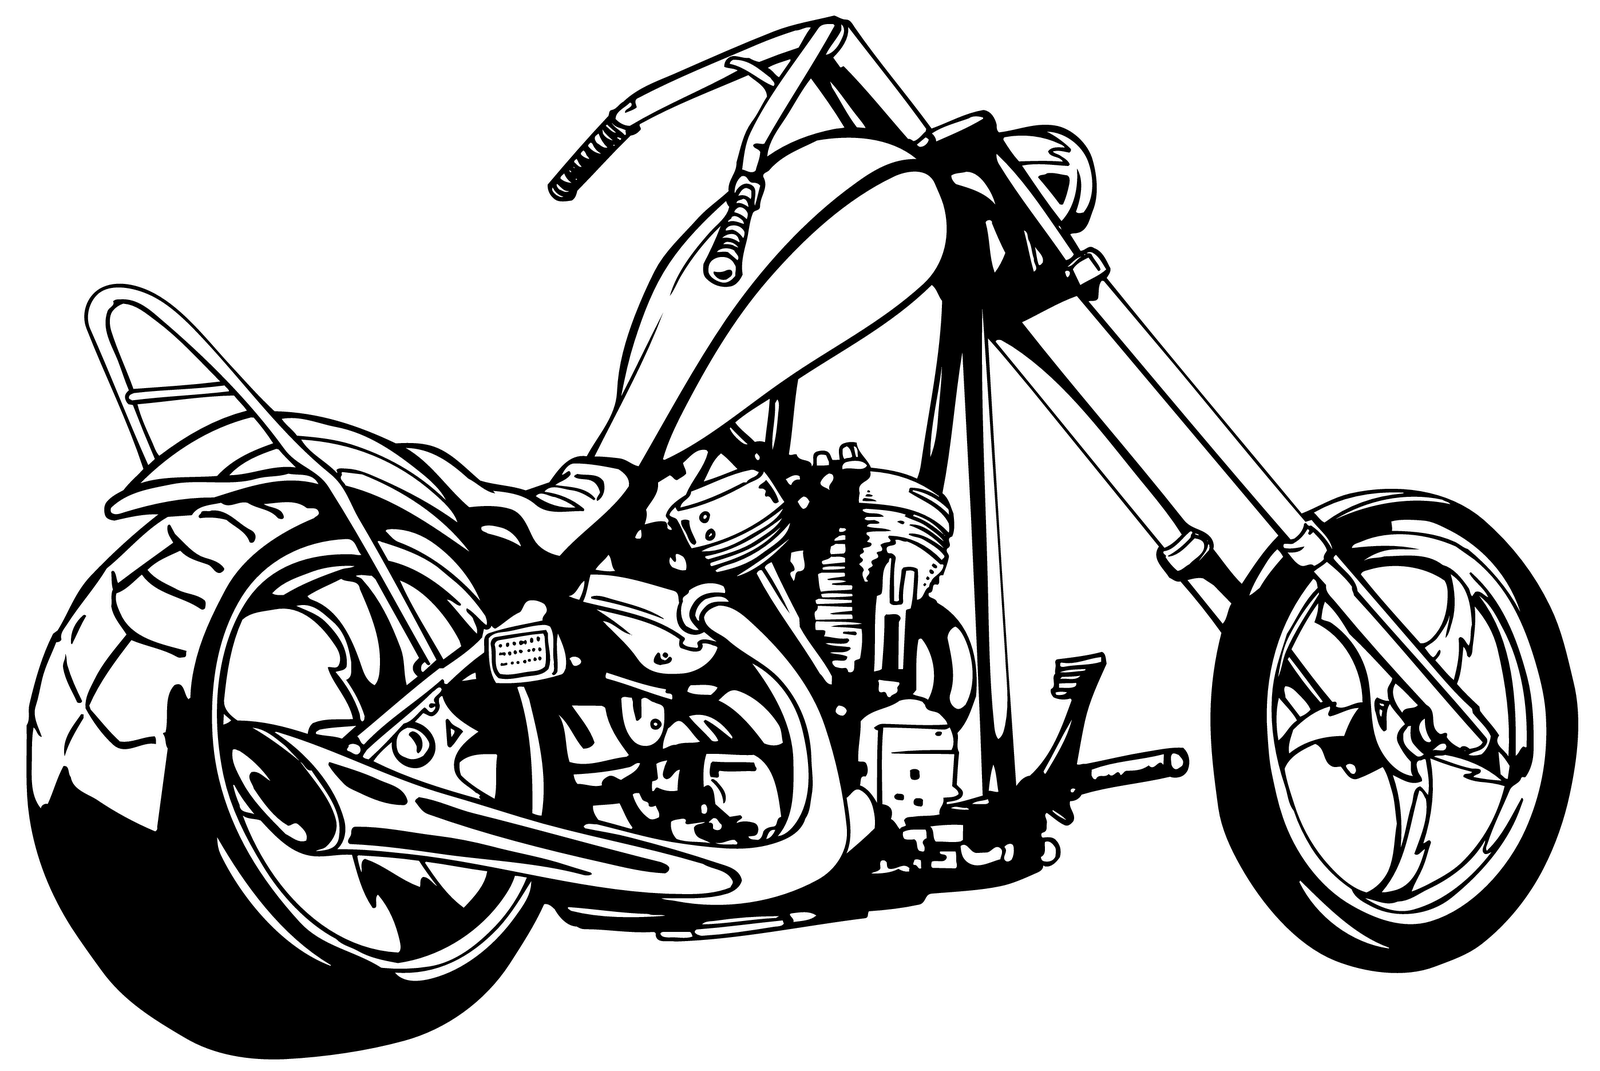 Clip Arts Related To : motorcycle clipart chopper. 